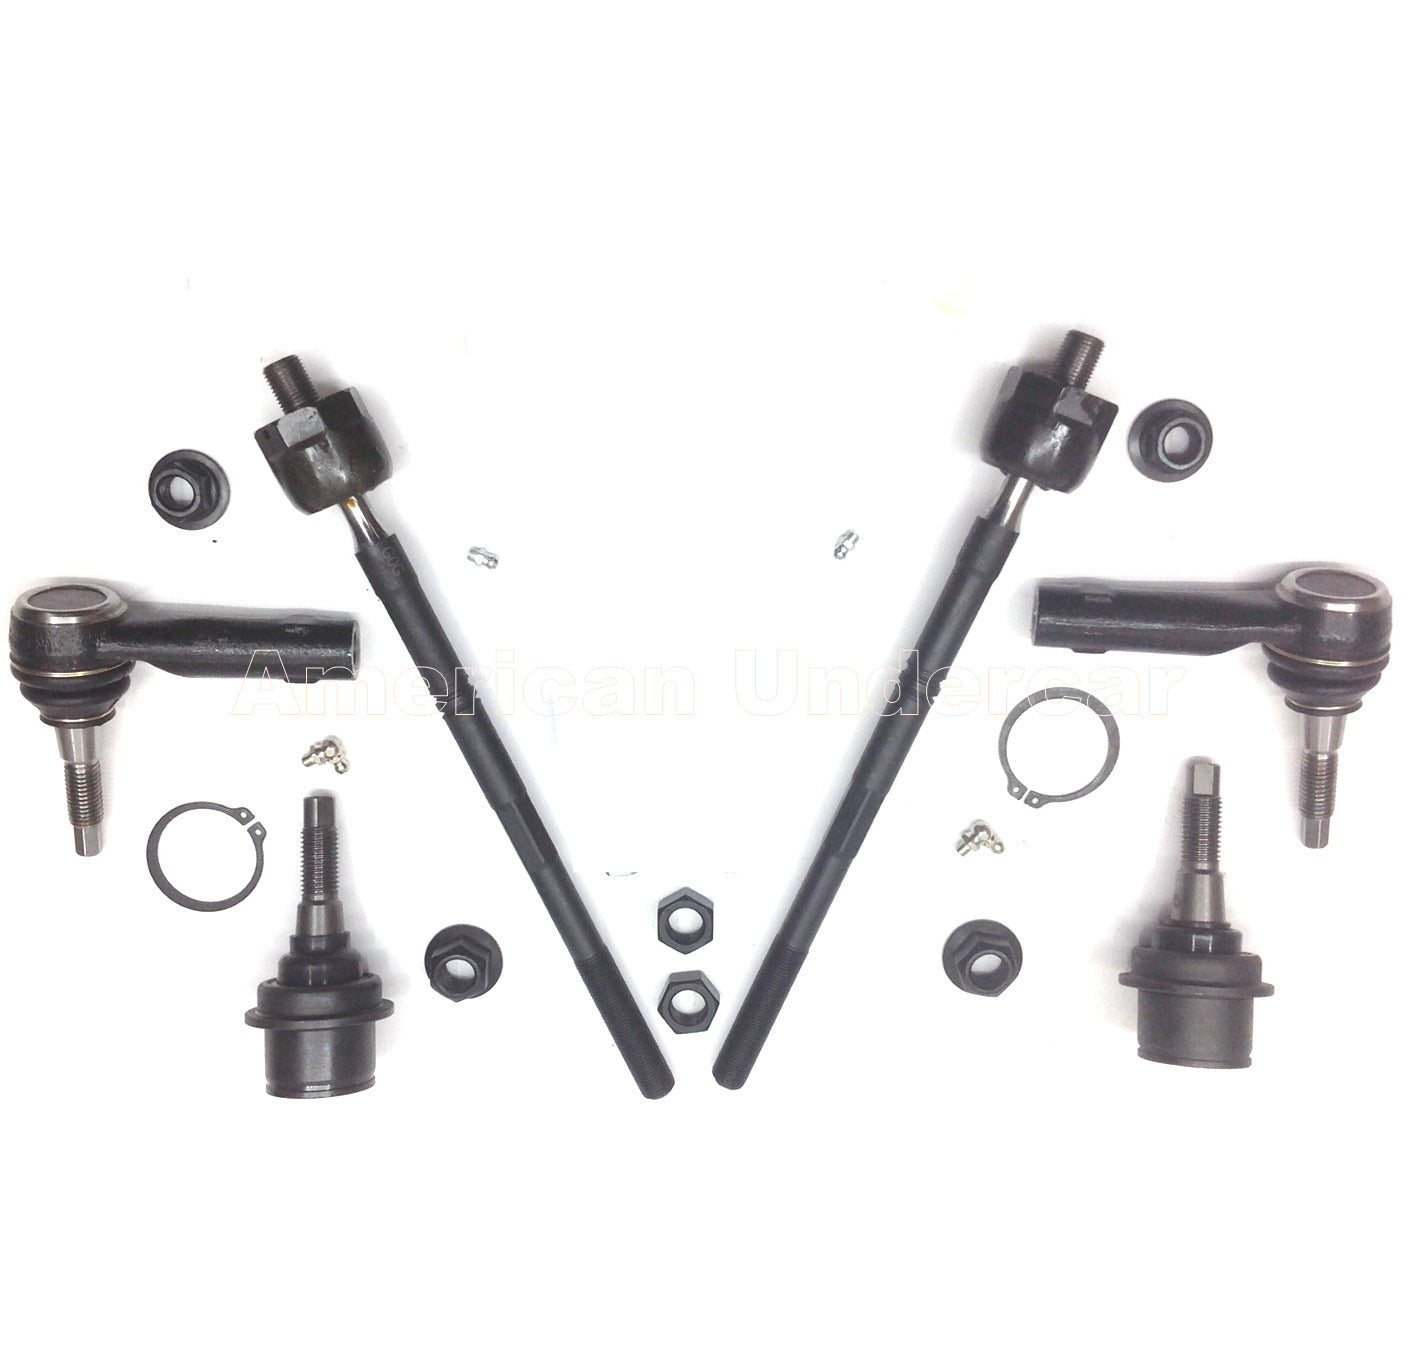 HD Lower Ball Joints Tie Rod Ends Steering Kit for 2004-2008 Ford F150 2WD